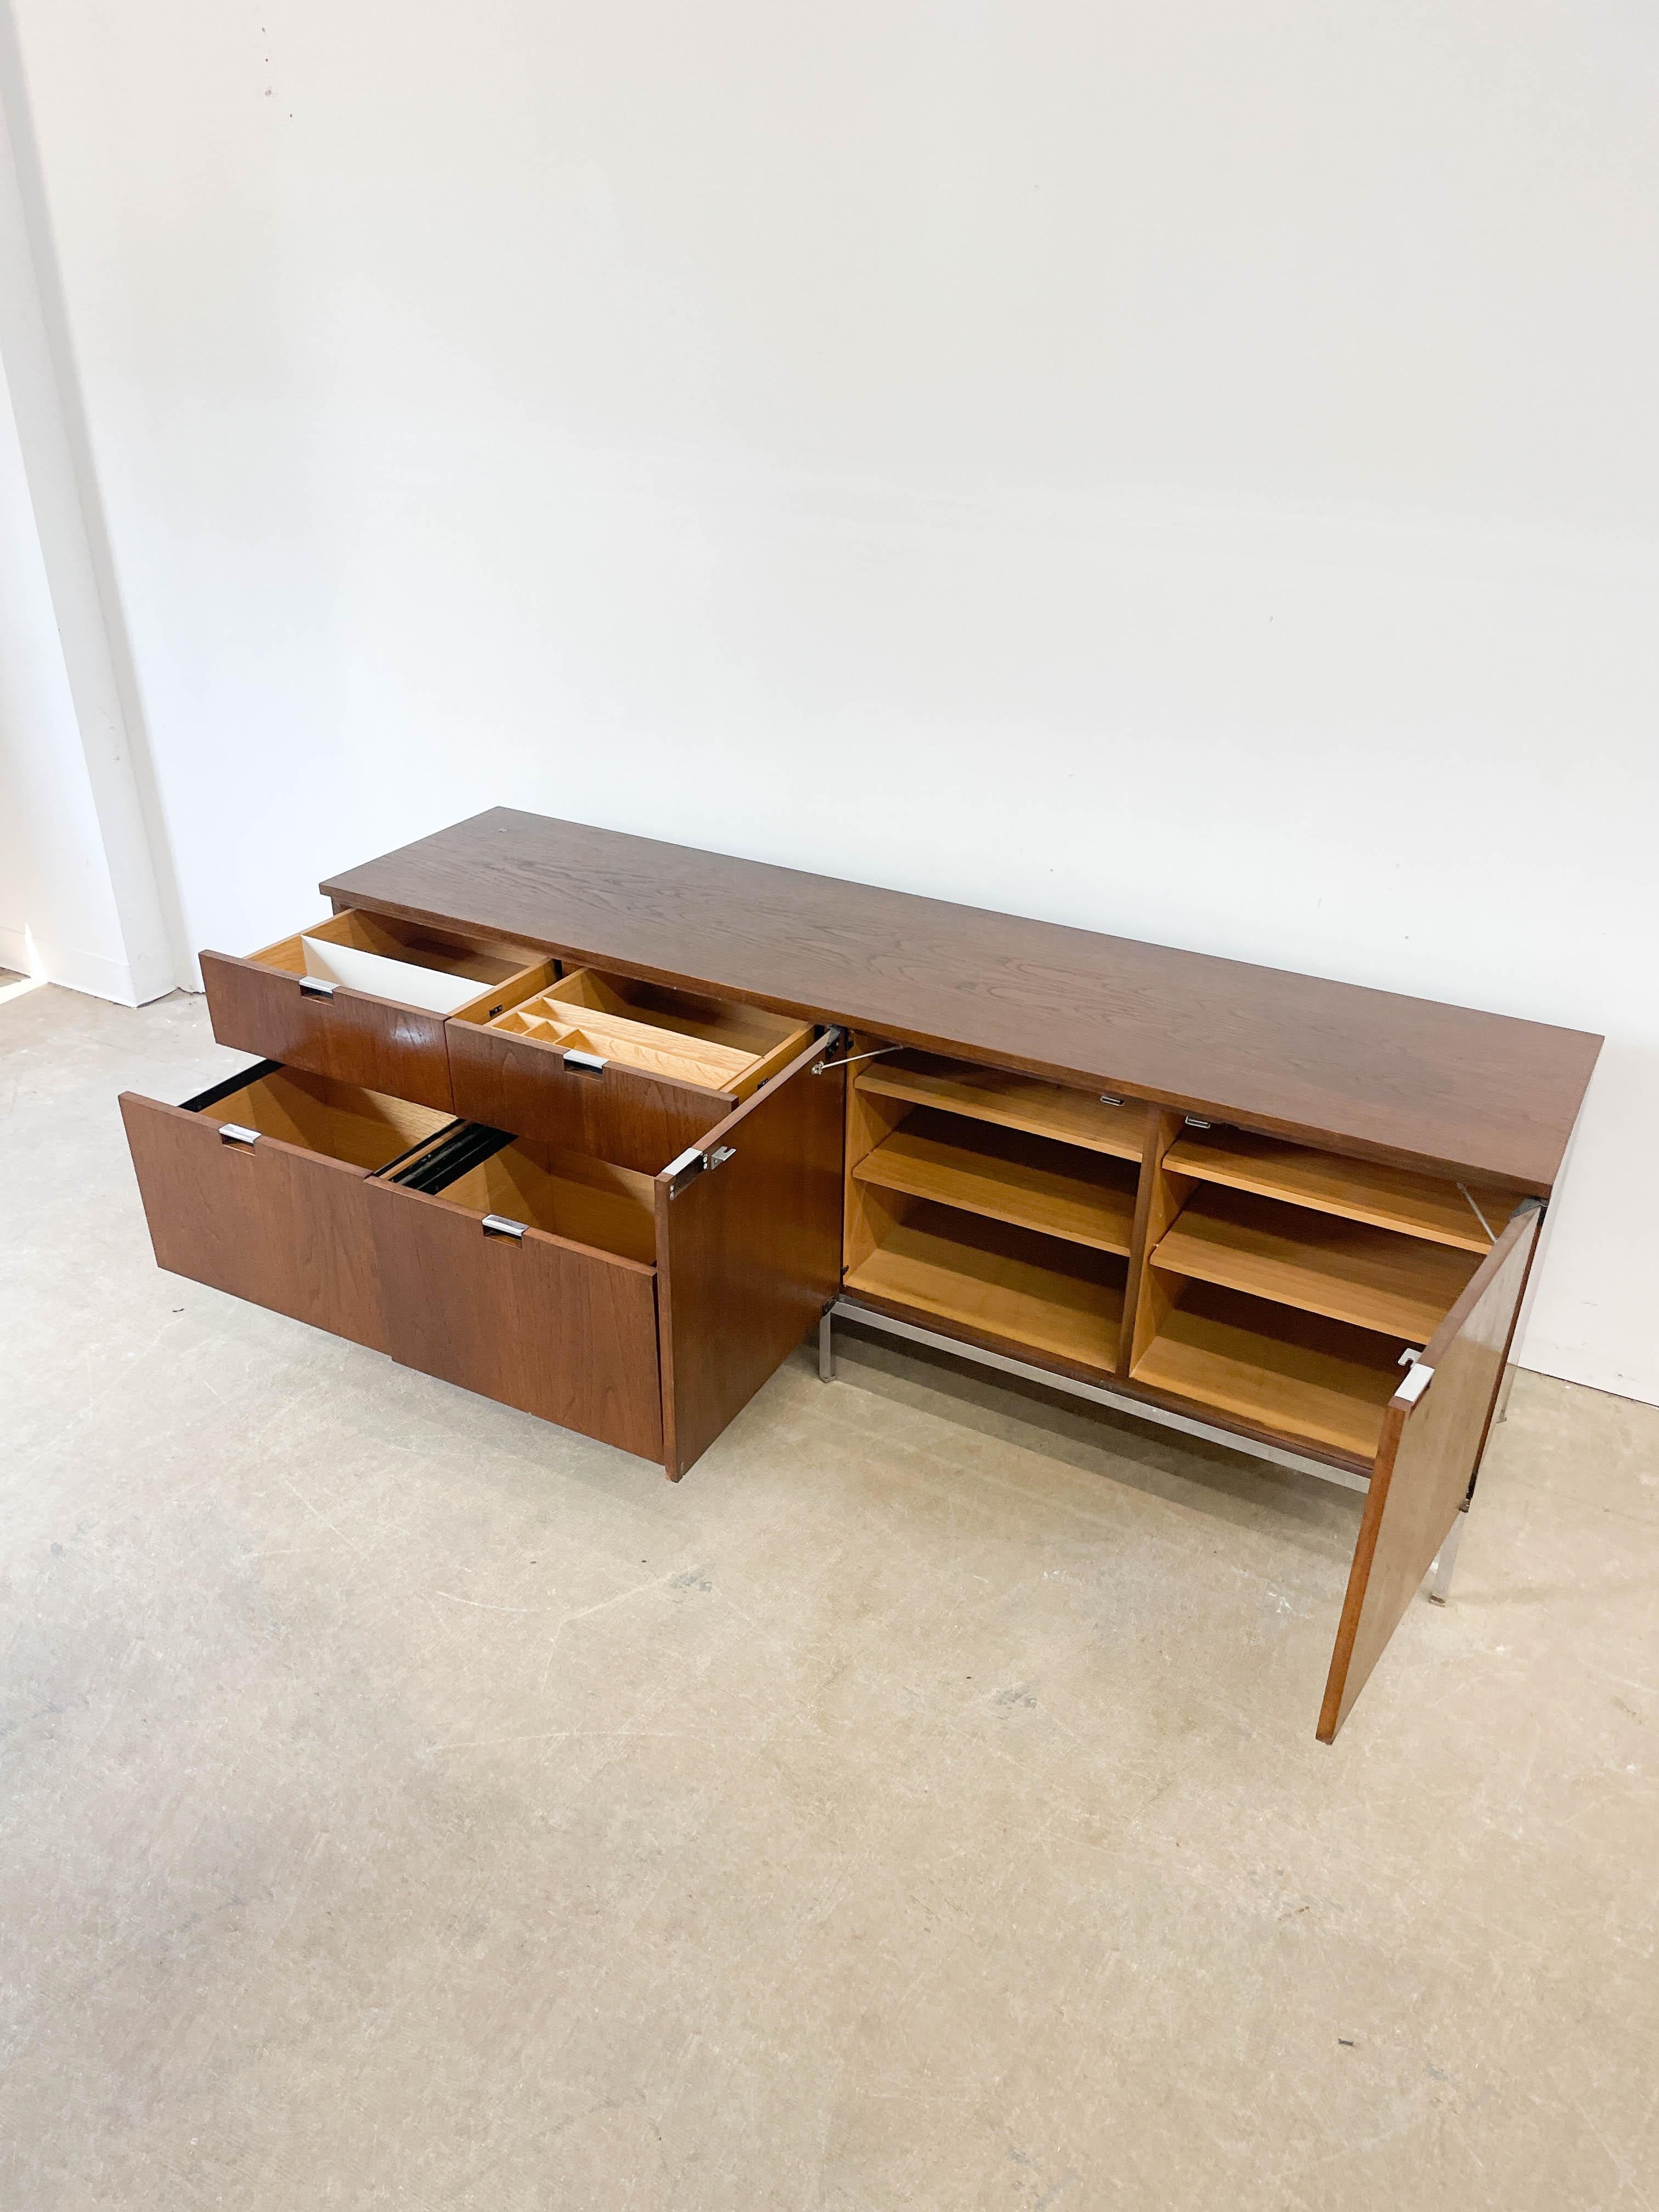 Functional and understated walnut credenza designed by Jens Risom for his own company, Jens Risom Design in the 1950s. This pieces features five drawers, two of which are hanging file drawers, a slide out typewriter tray and a larger storage